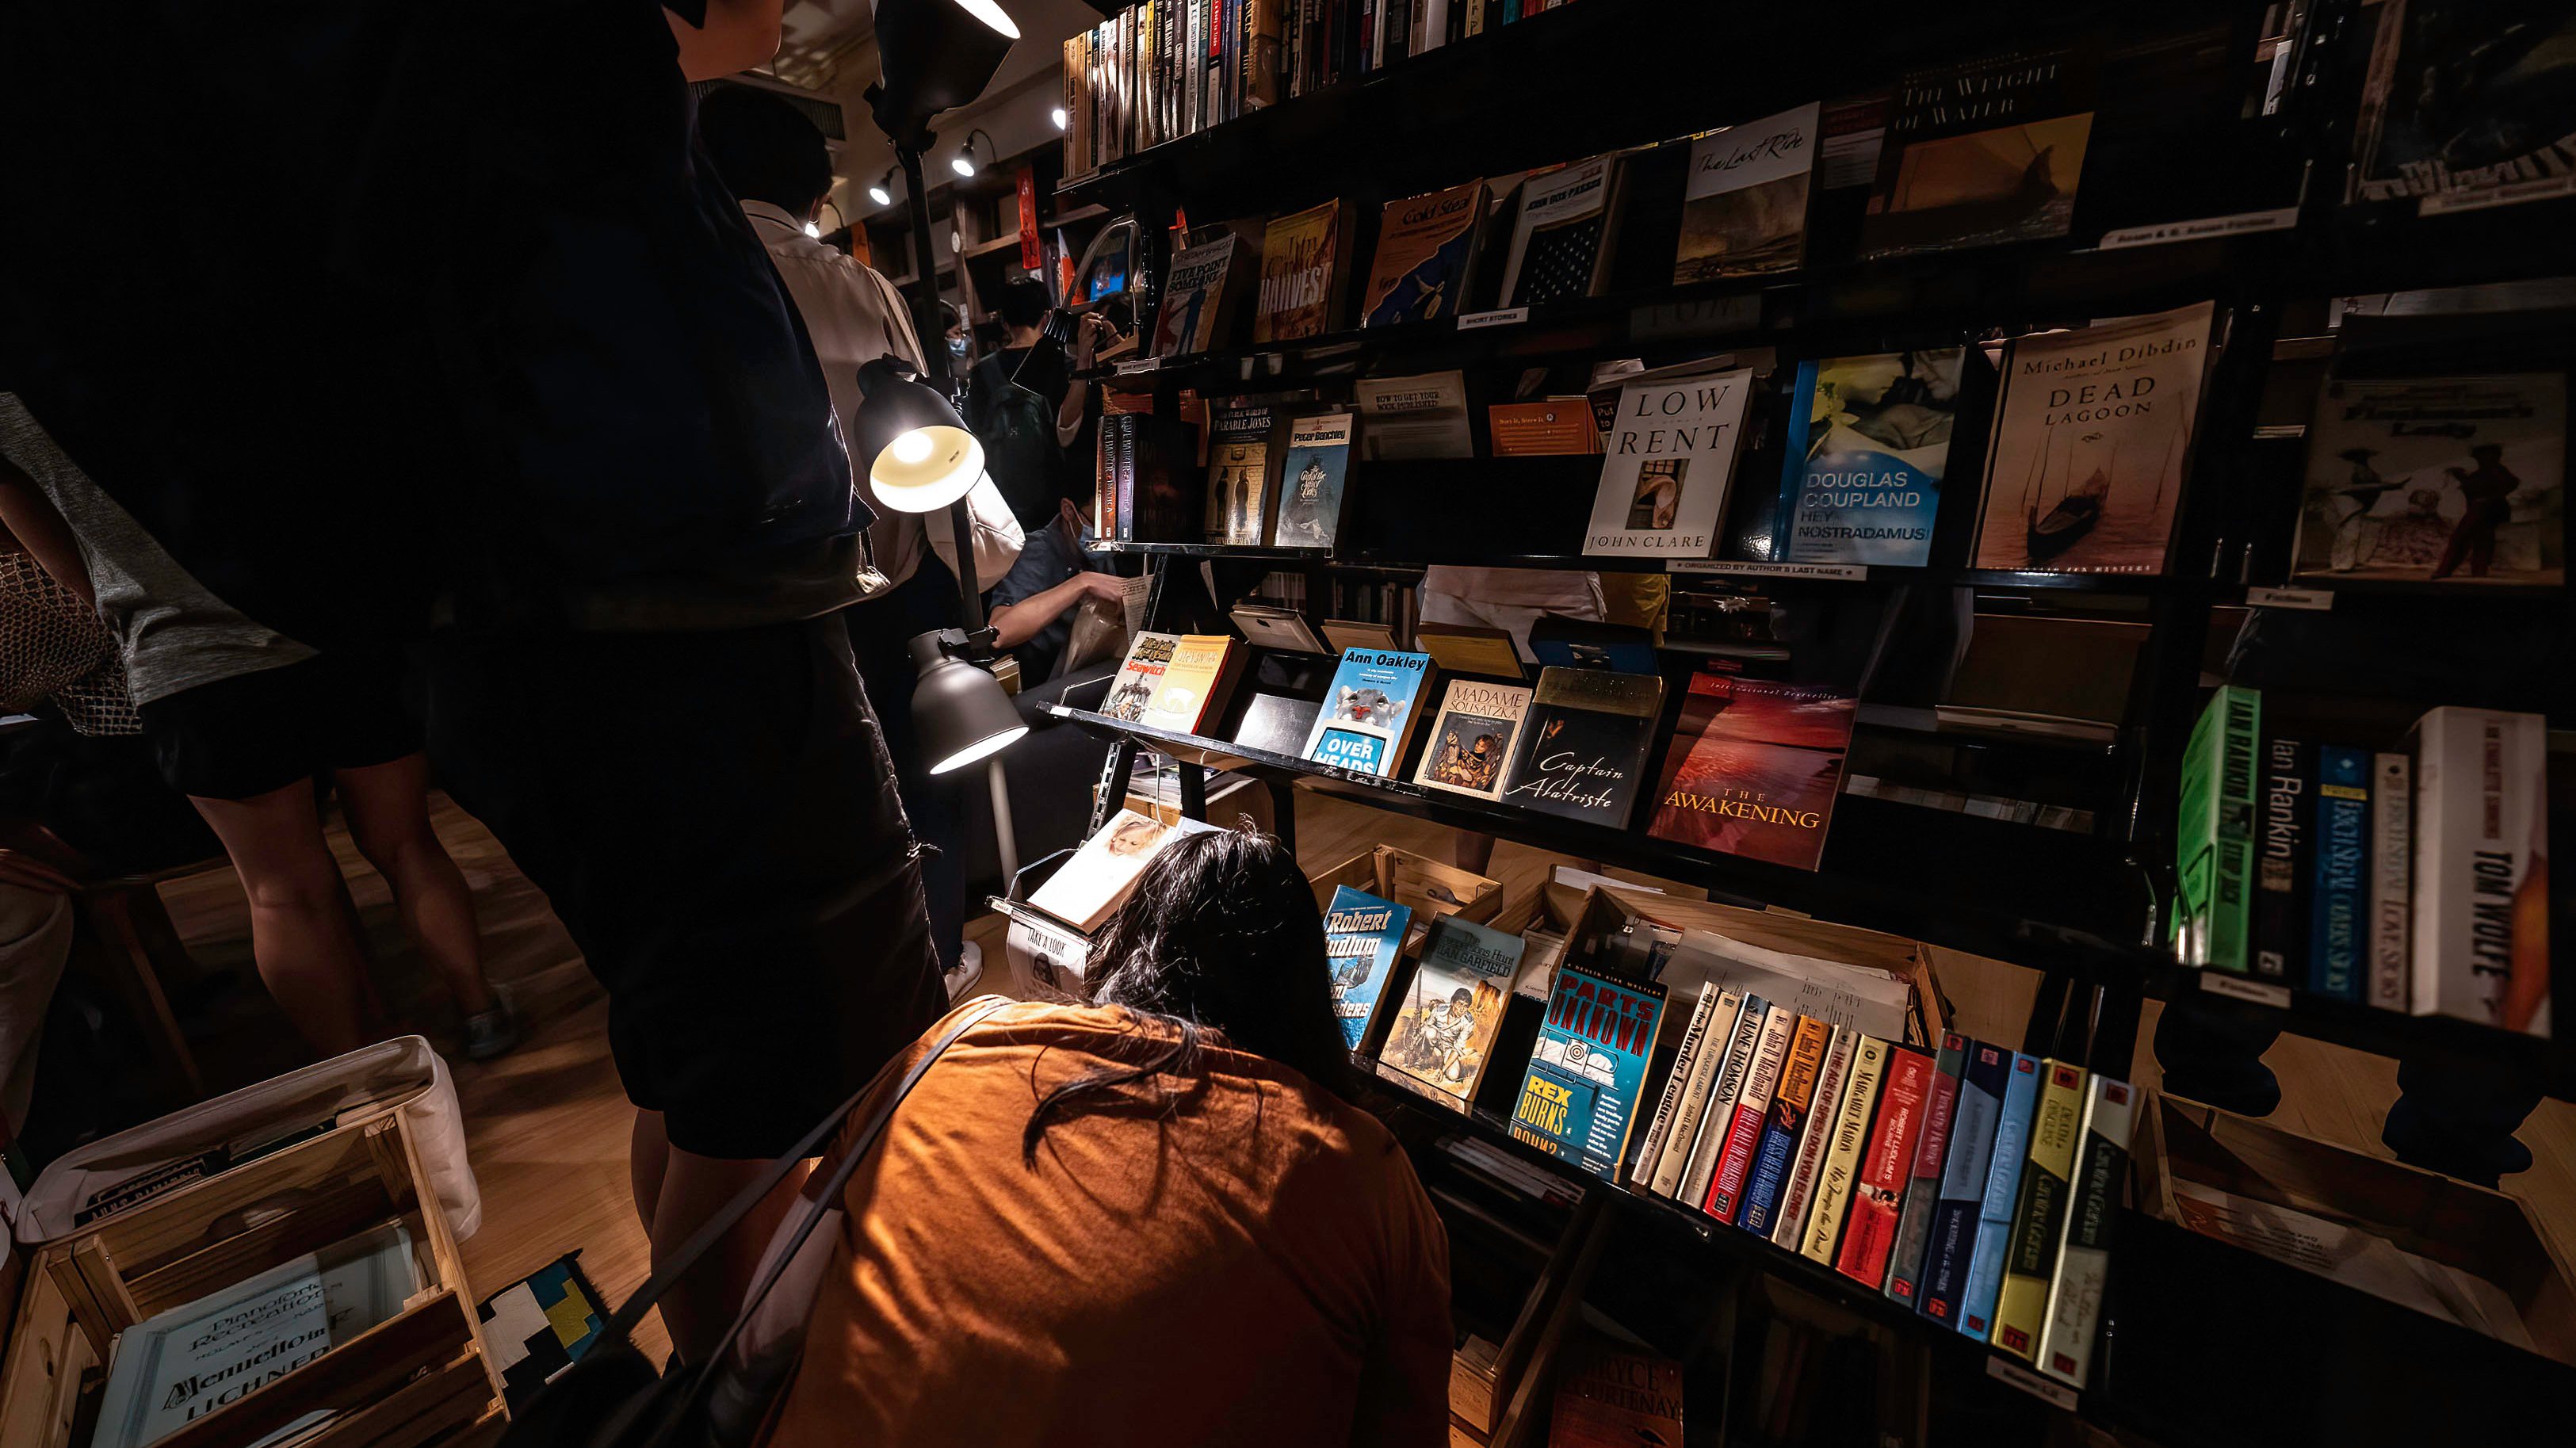 A woman browses the books on a bottom shelf.Crowds of